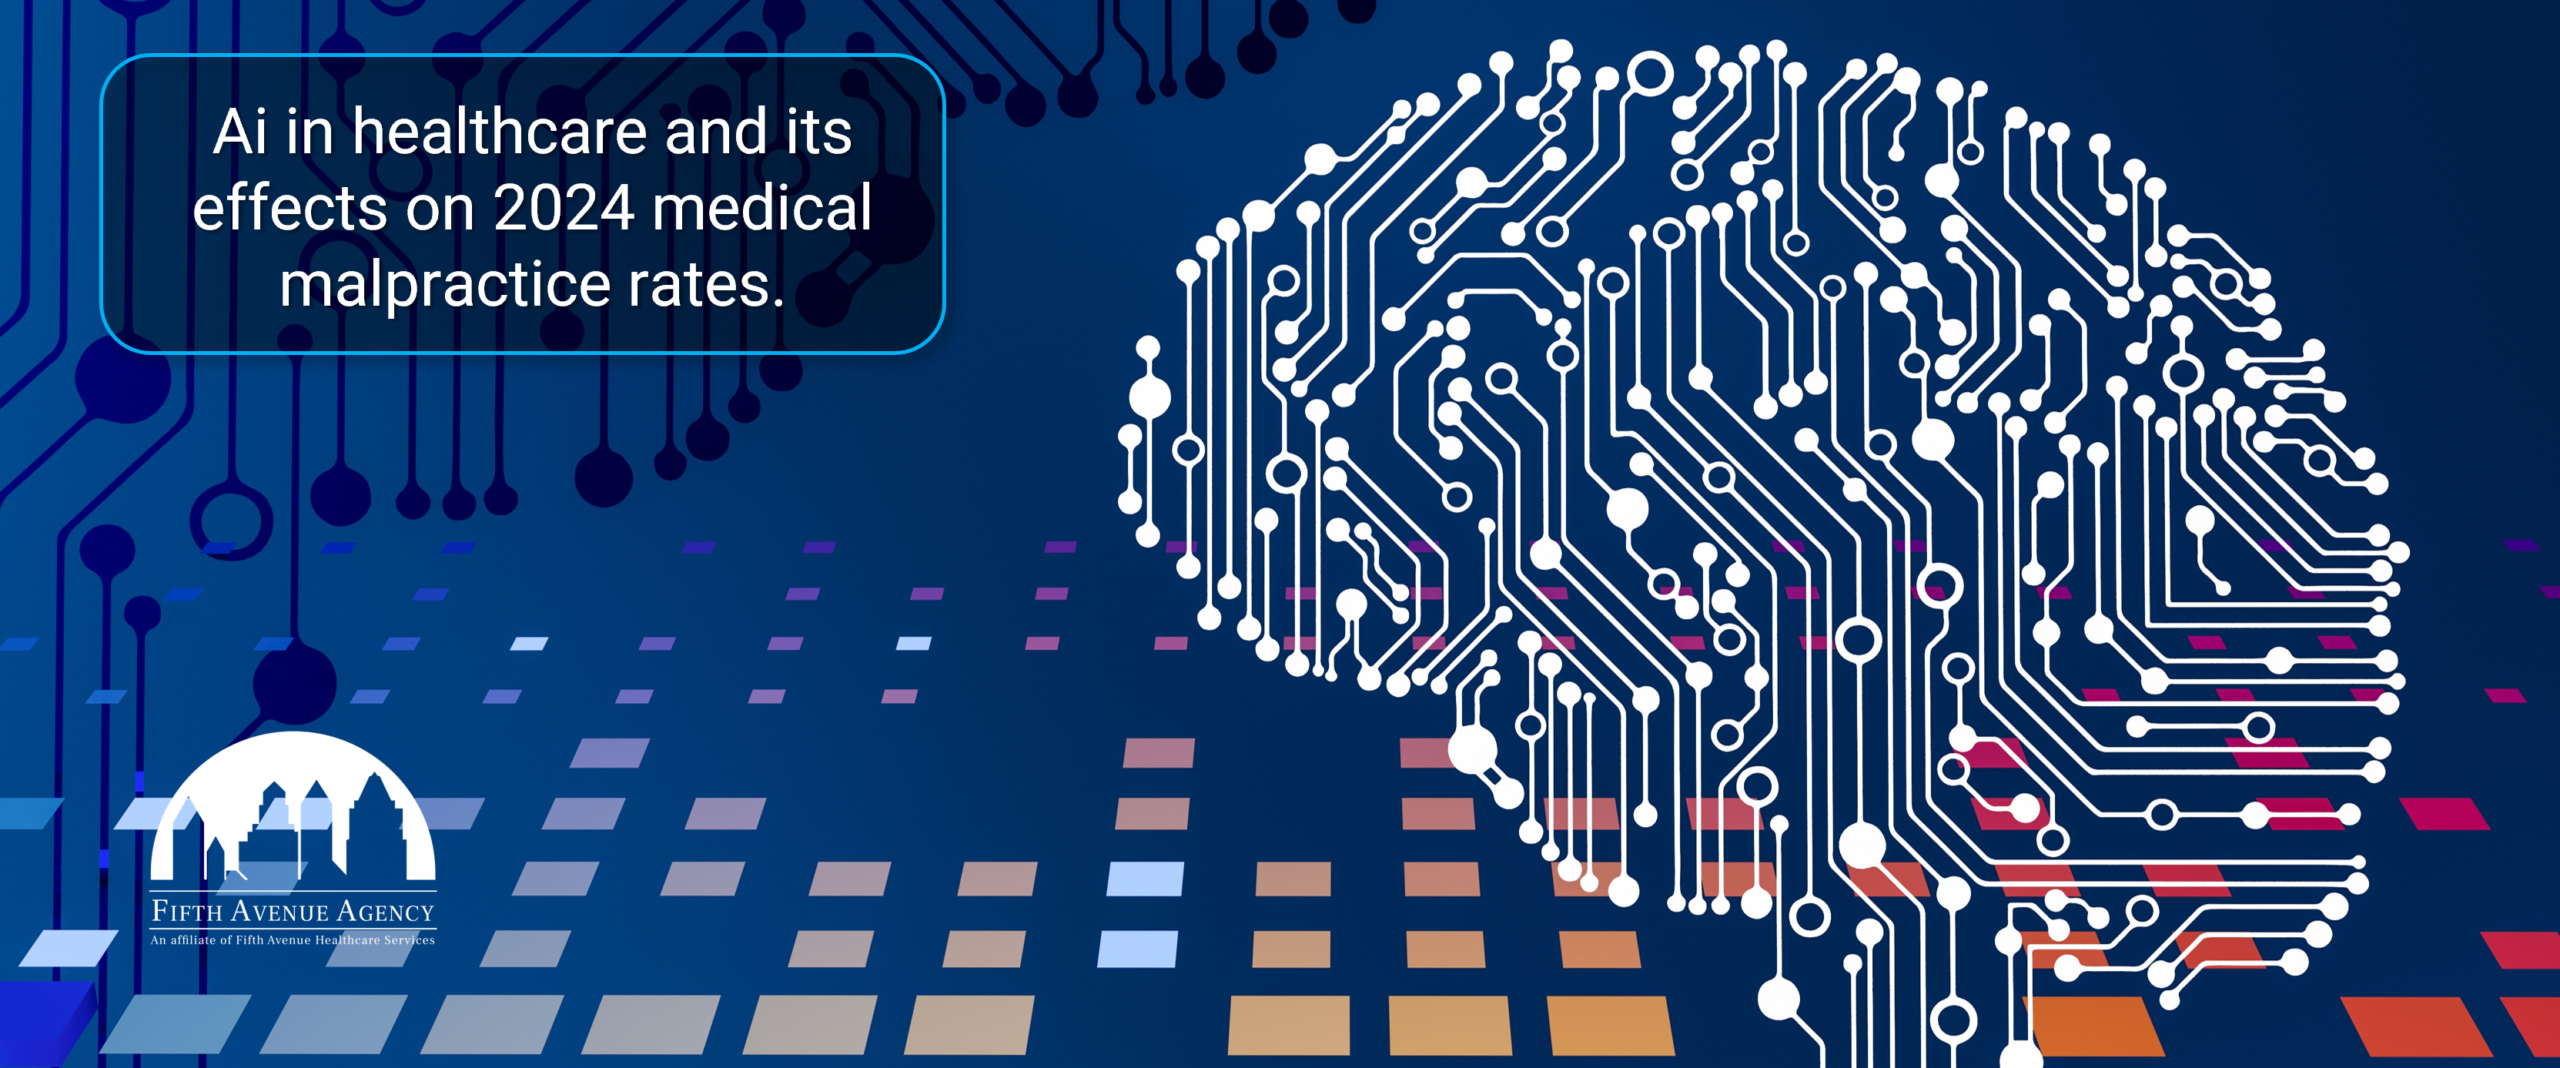 Ai Effects On 2024 Medical Malpractice Rates